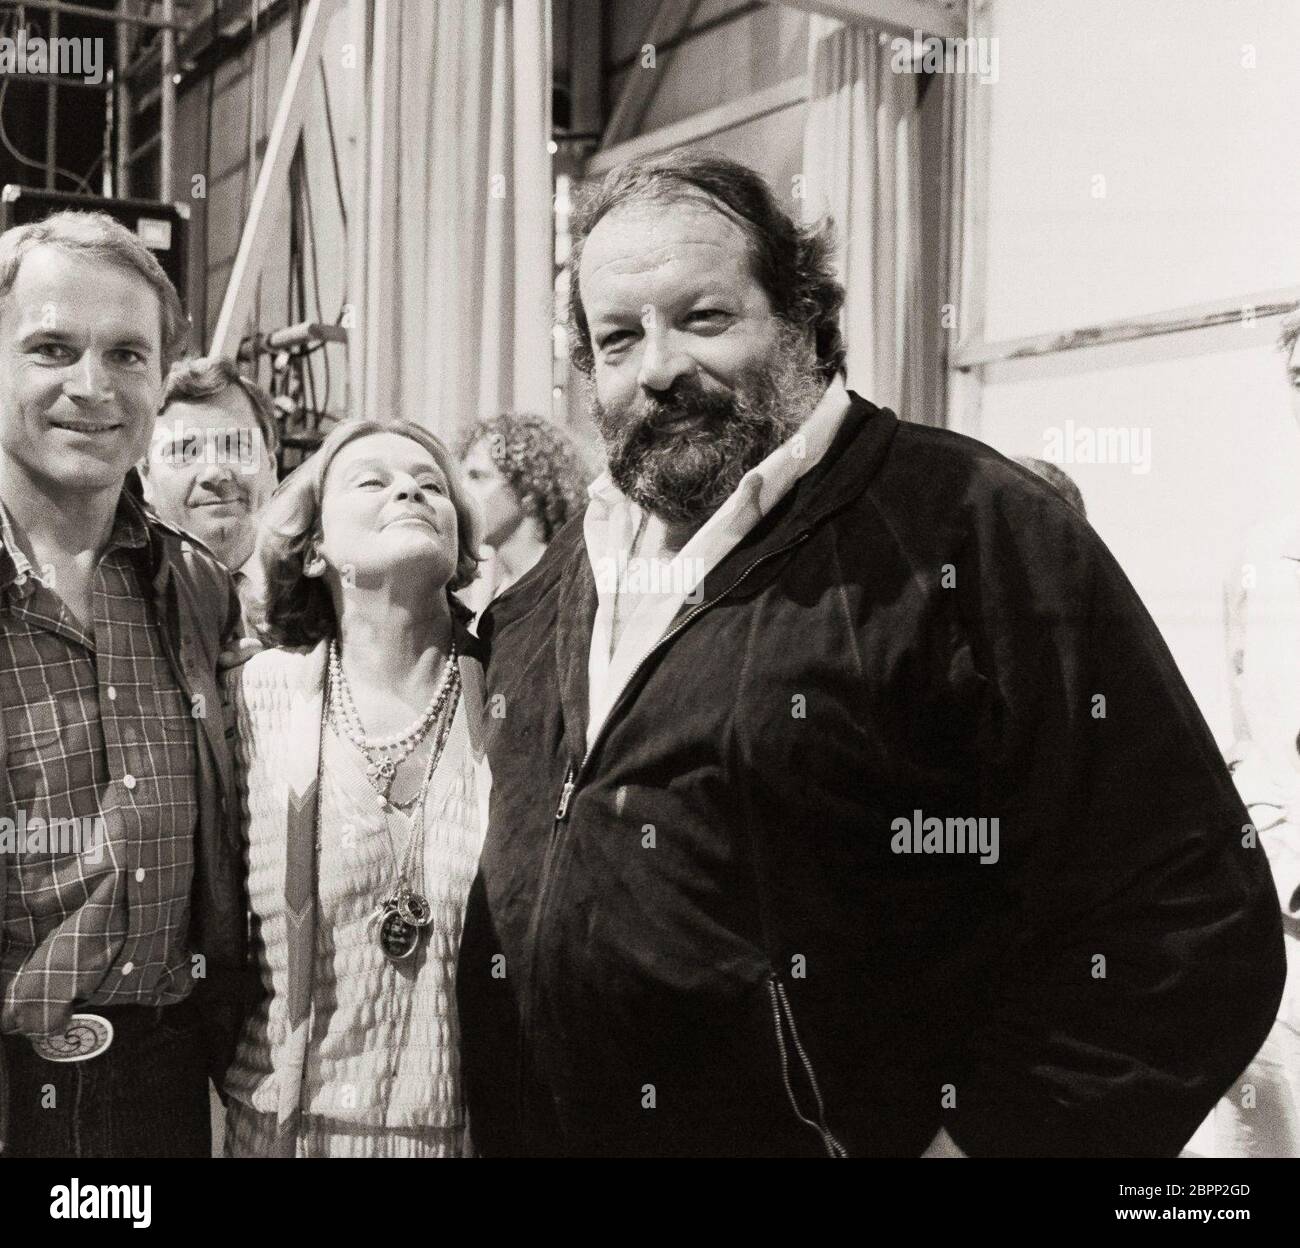 Bud spencer terence hill hi-res stock photography and images - Alamy